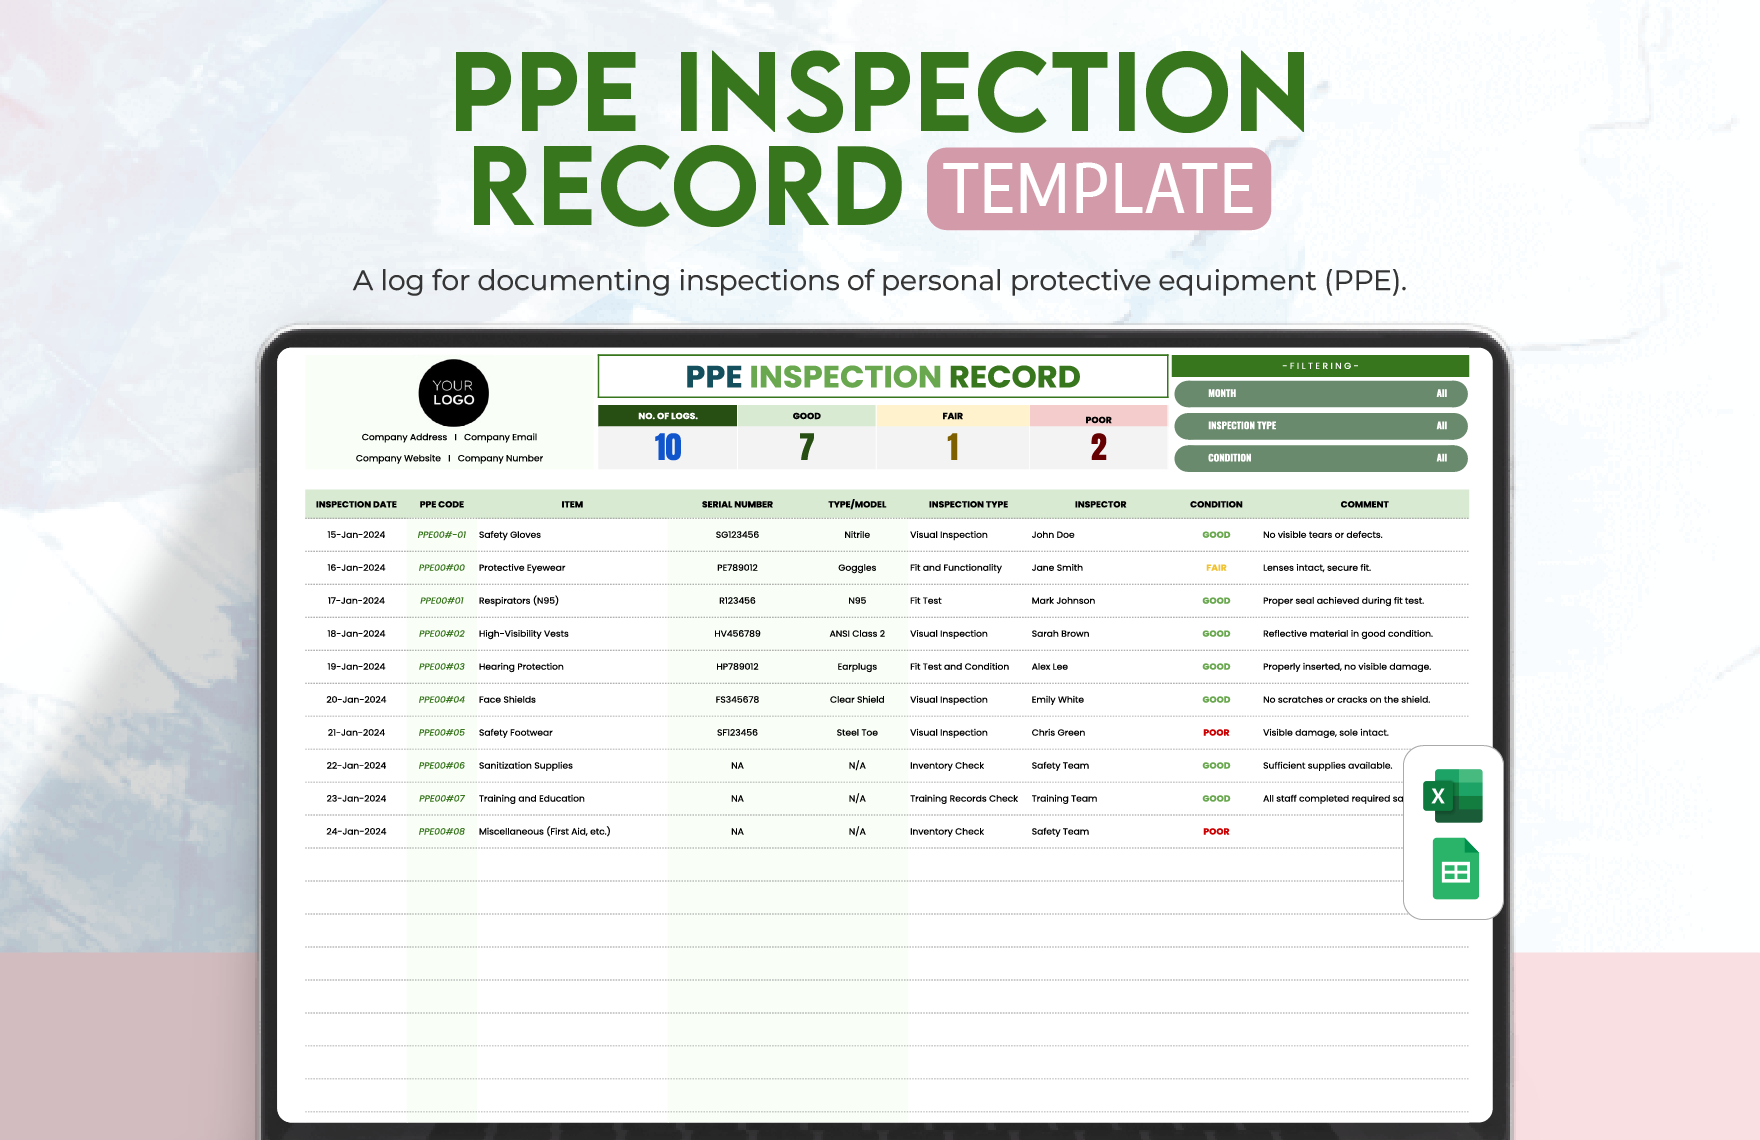 PPE Inspection Record Template in Excel, Google Sheets